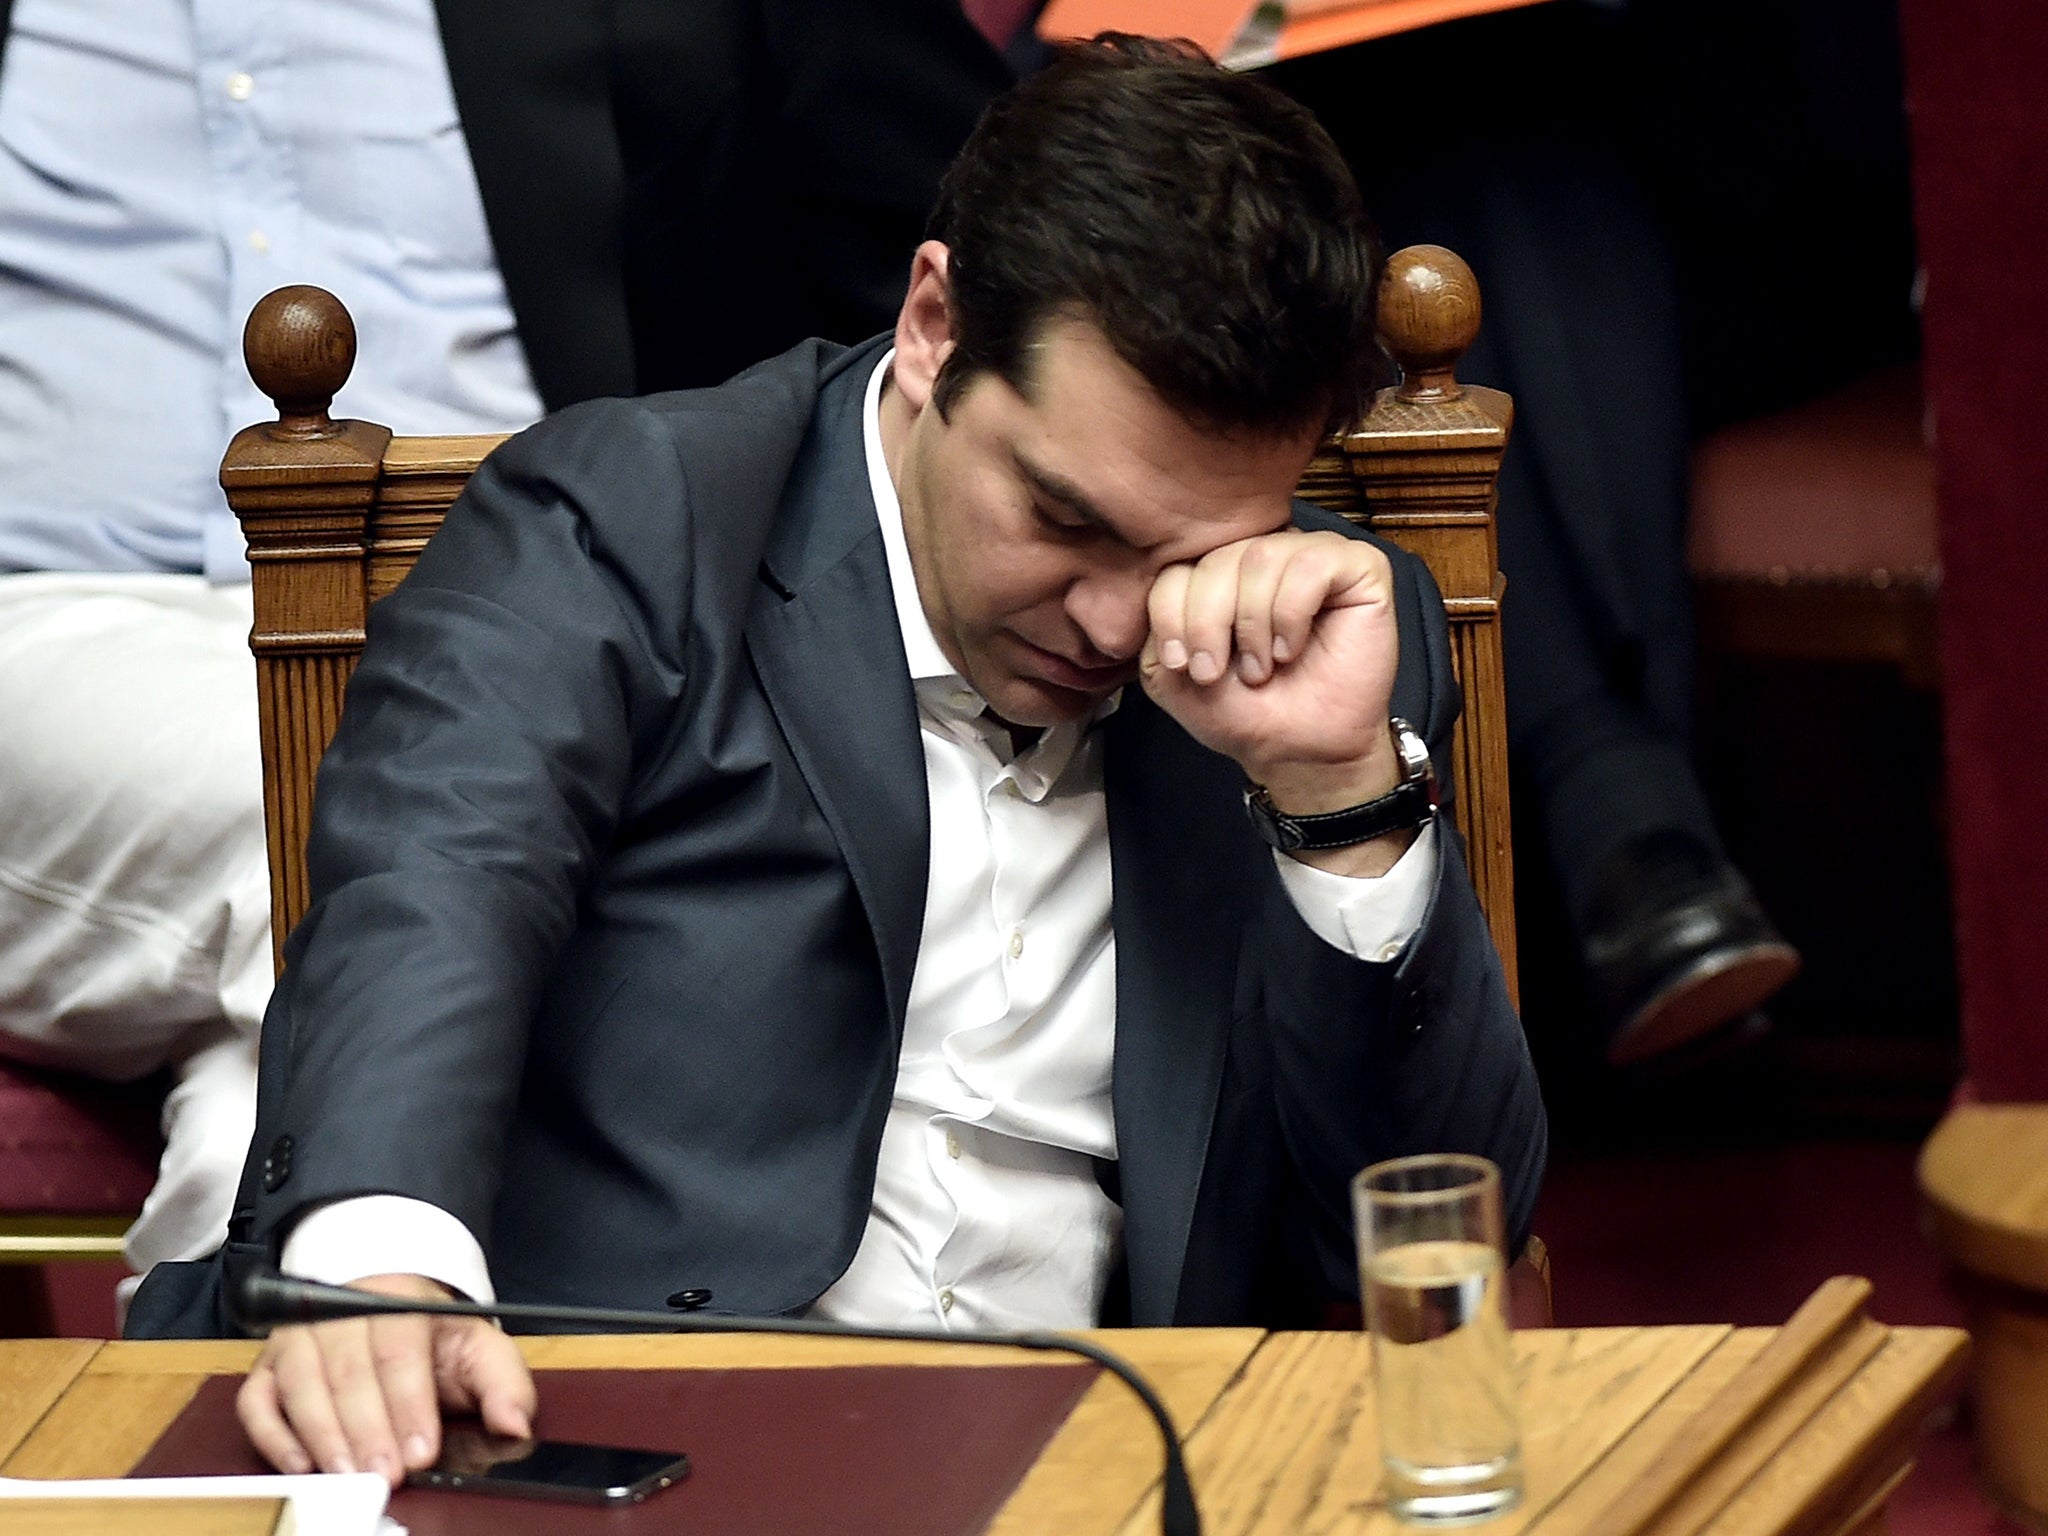 Greek Prime Minister Alexis Tsipras reacts during a parliament session in Athens